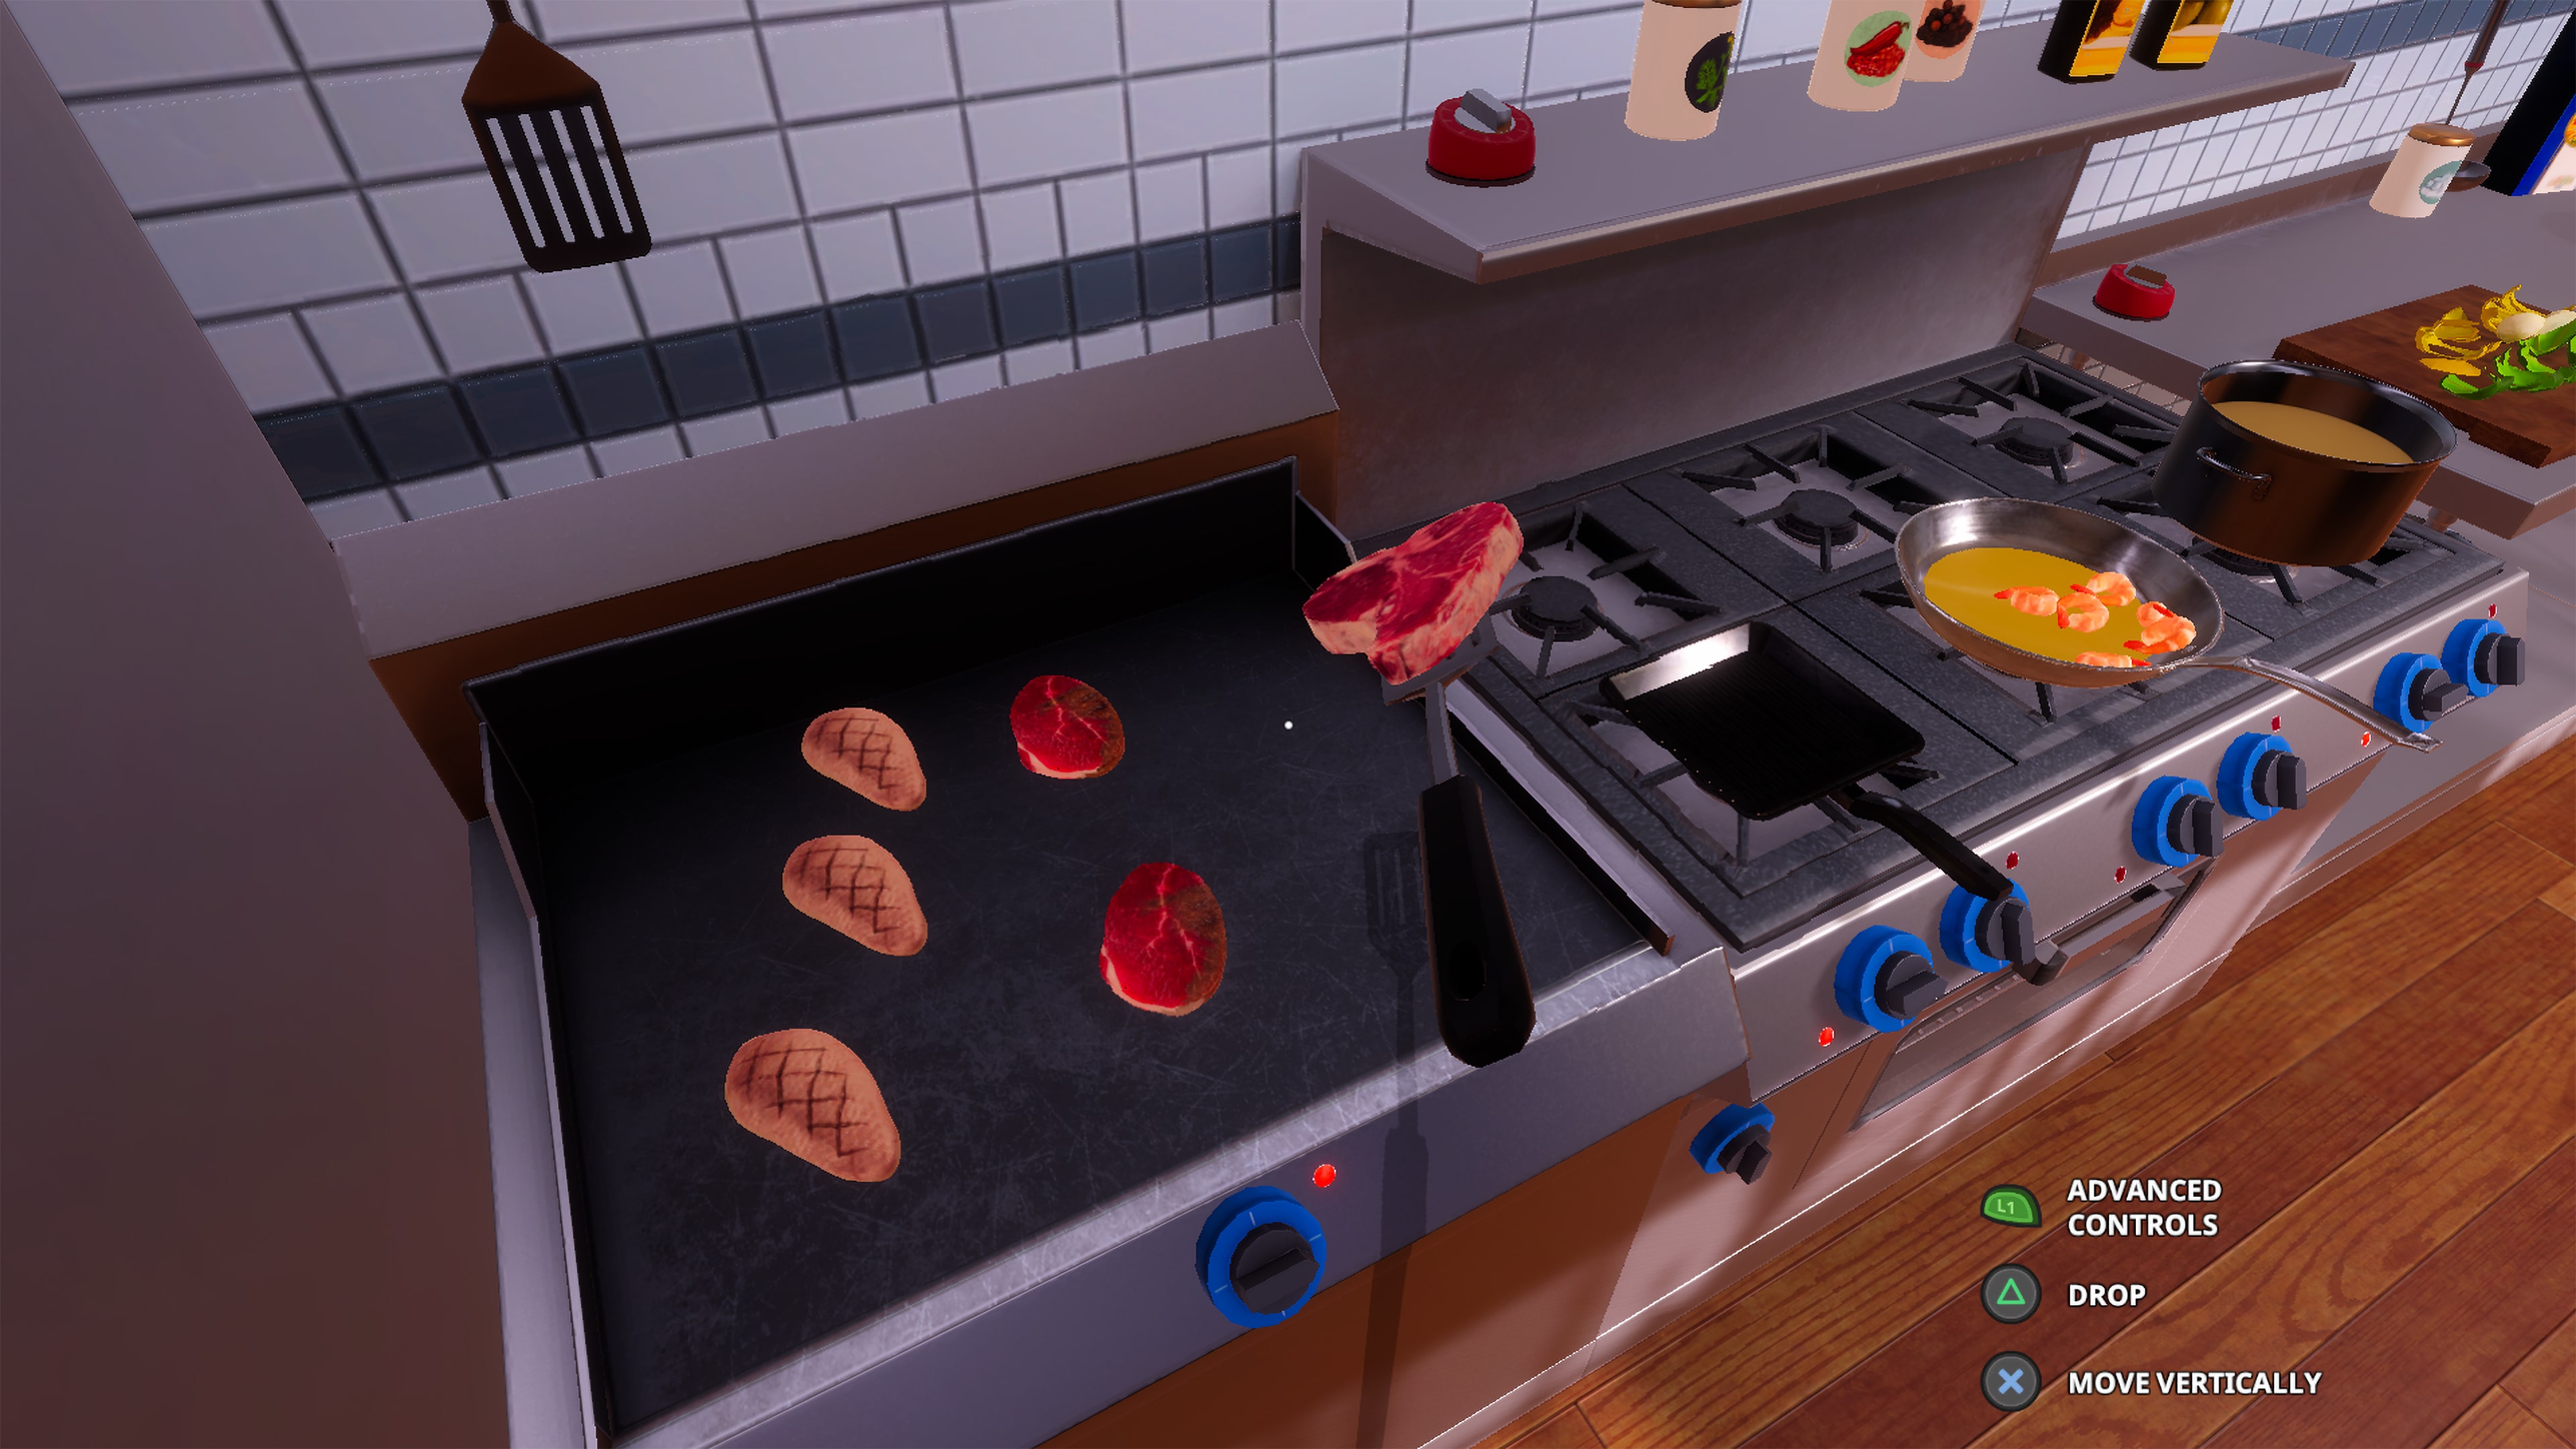 Cooking Simulator - Pizza for Switch